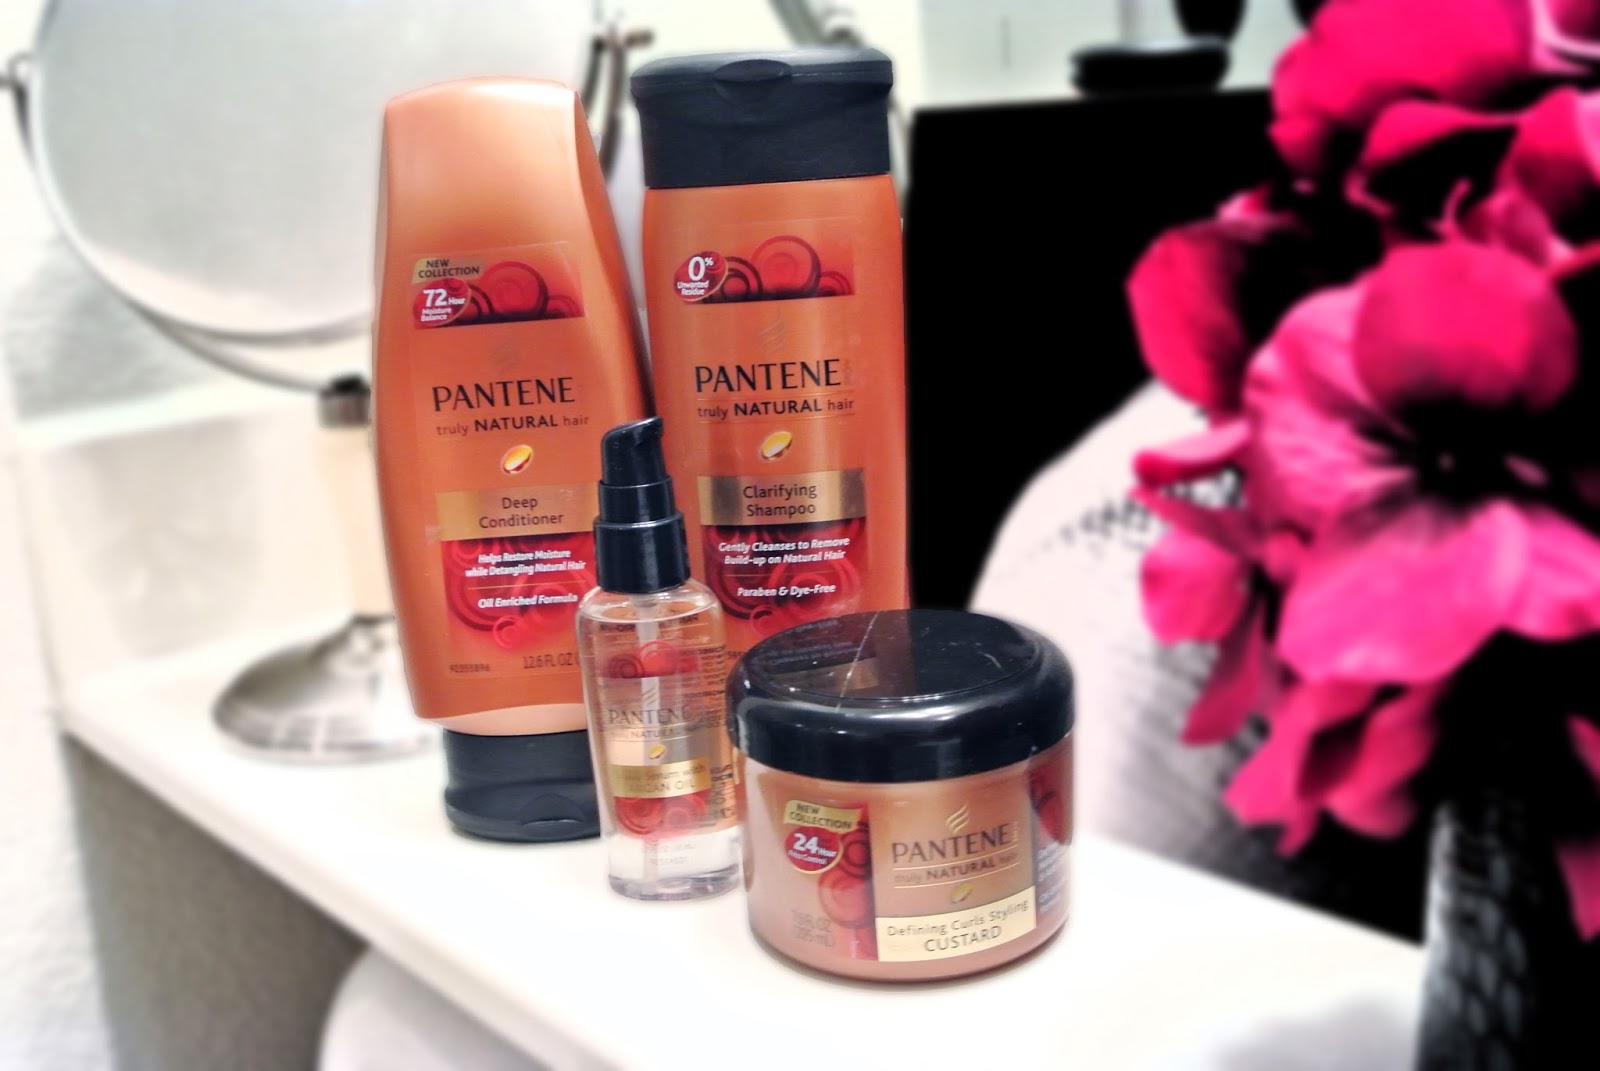 Pantene Pro-V Truly Natural, natural hair, curly hair, plus size